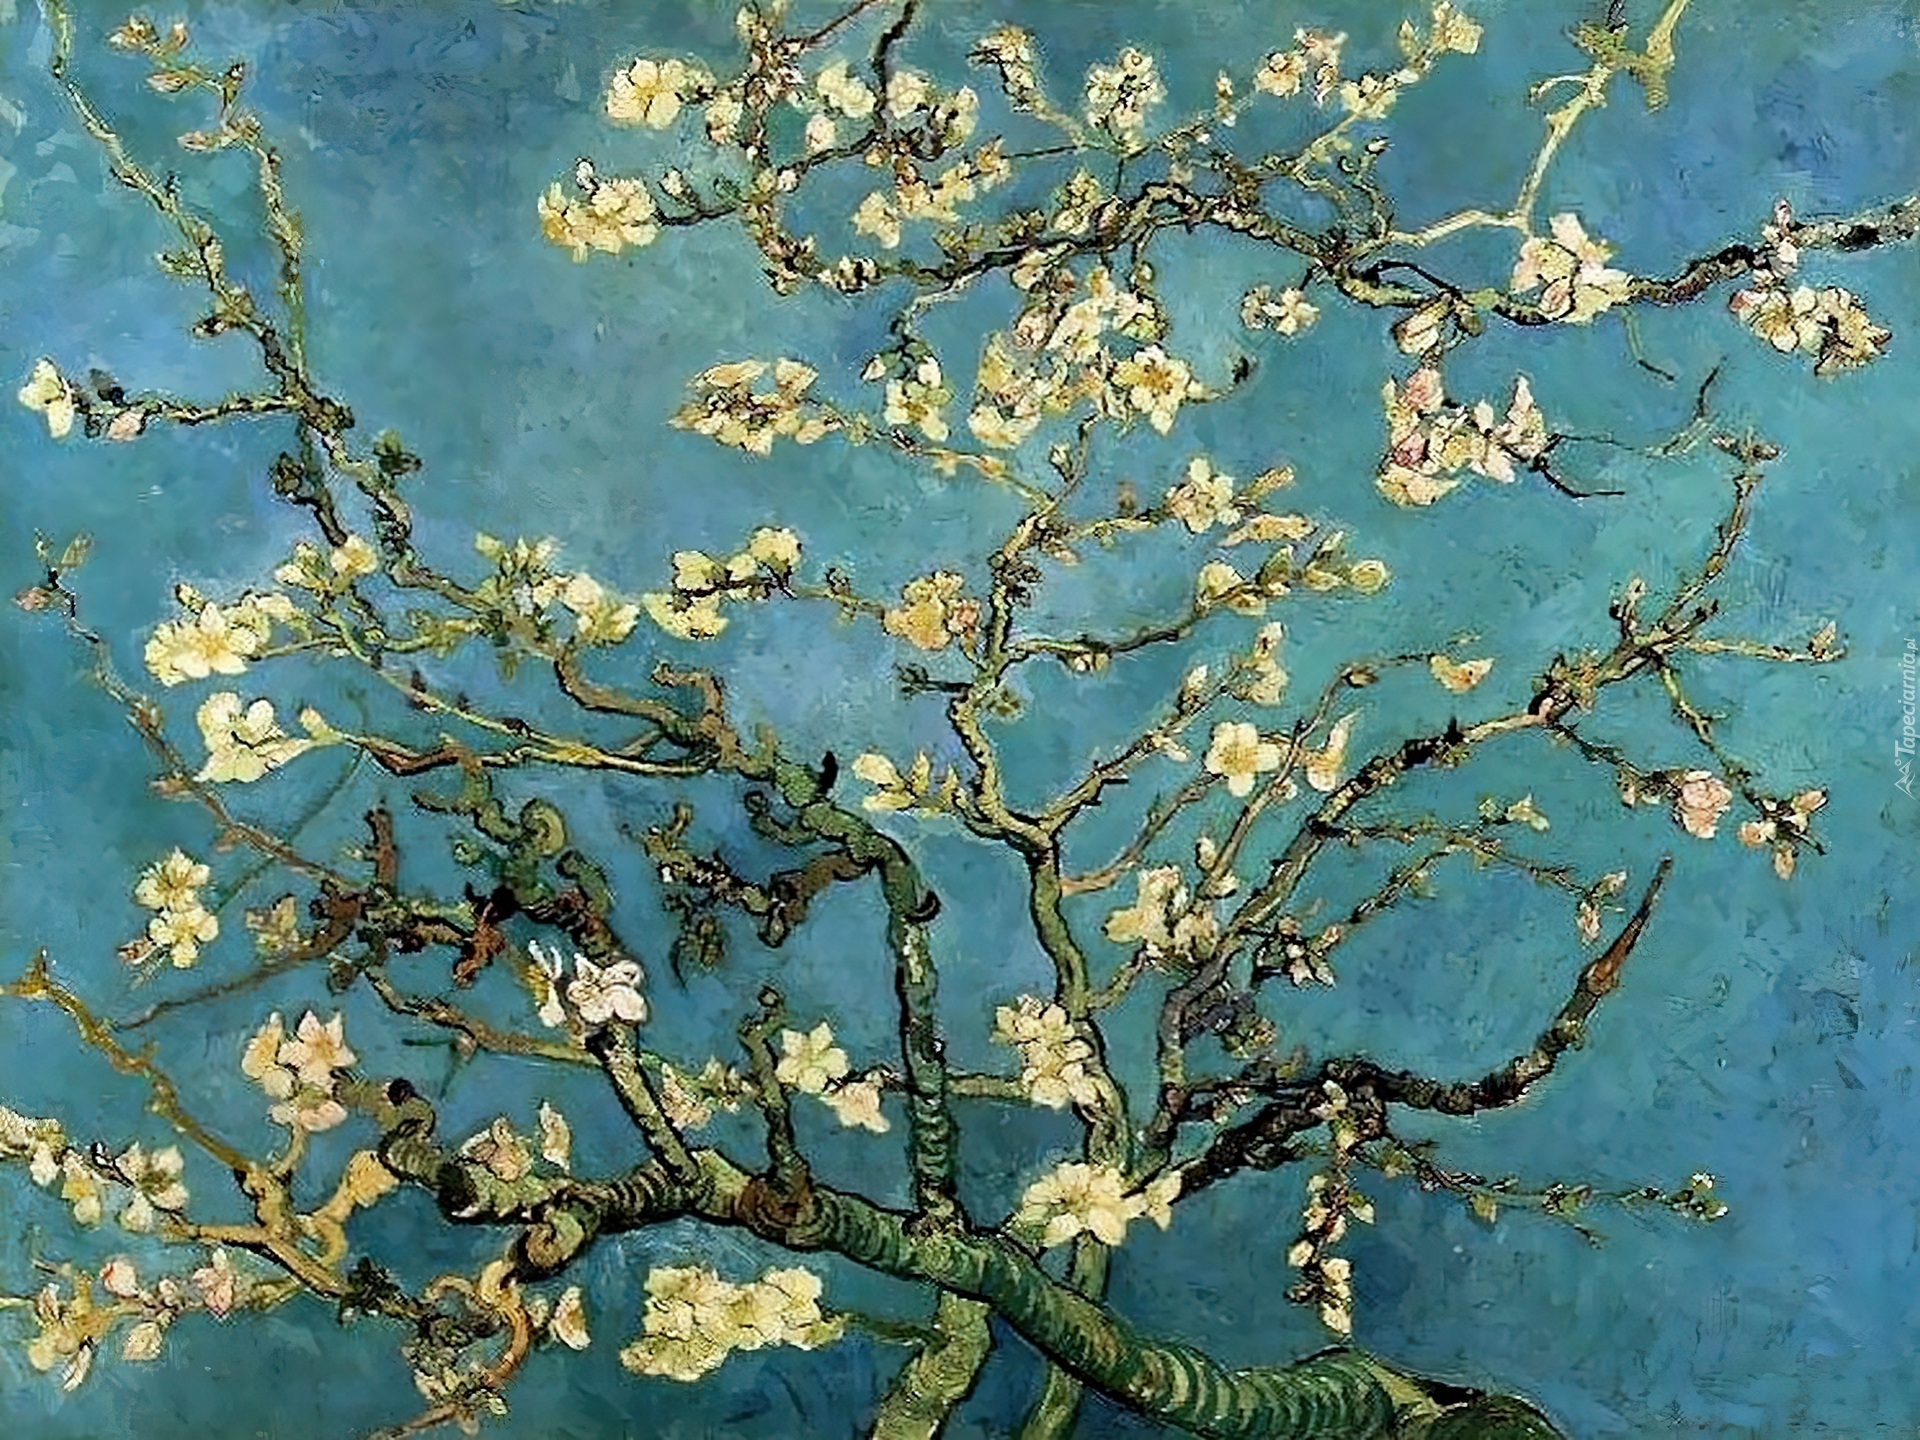 Vincent Van Gogh, Almond, Branches, In, Bloom